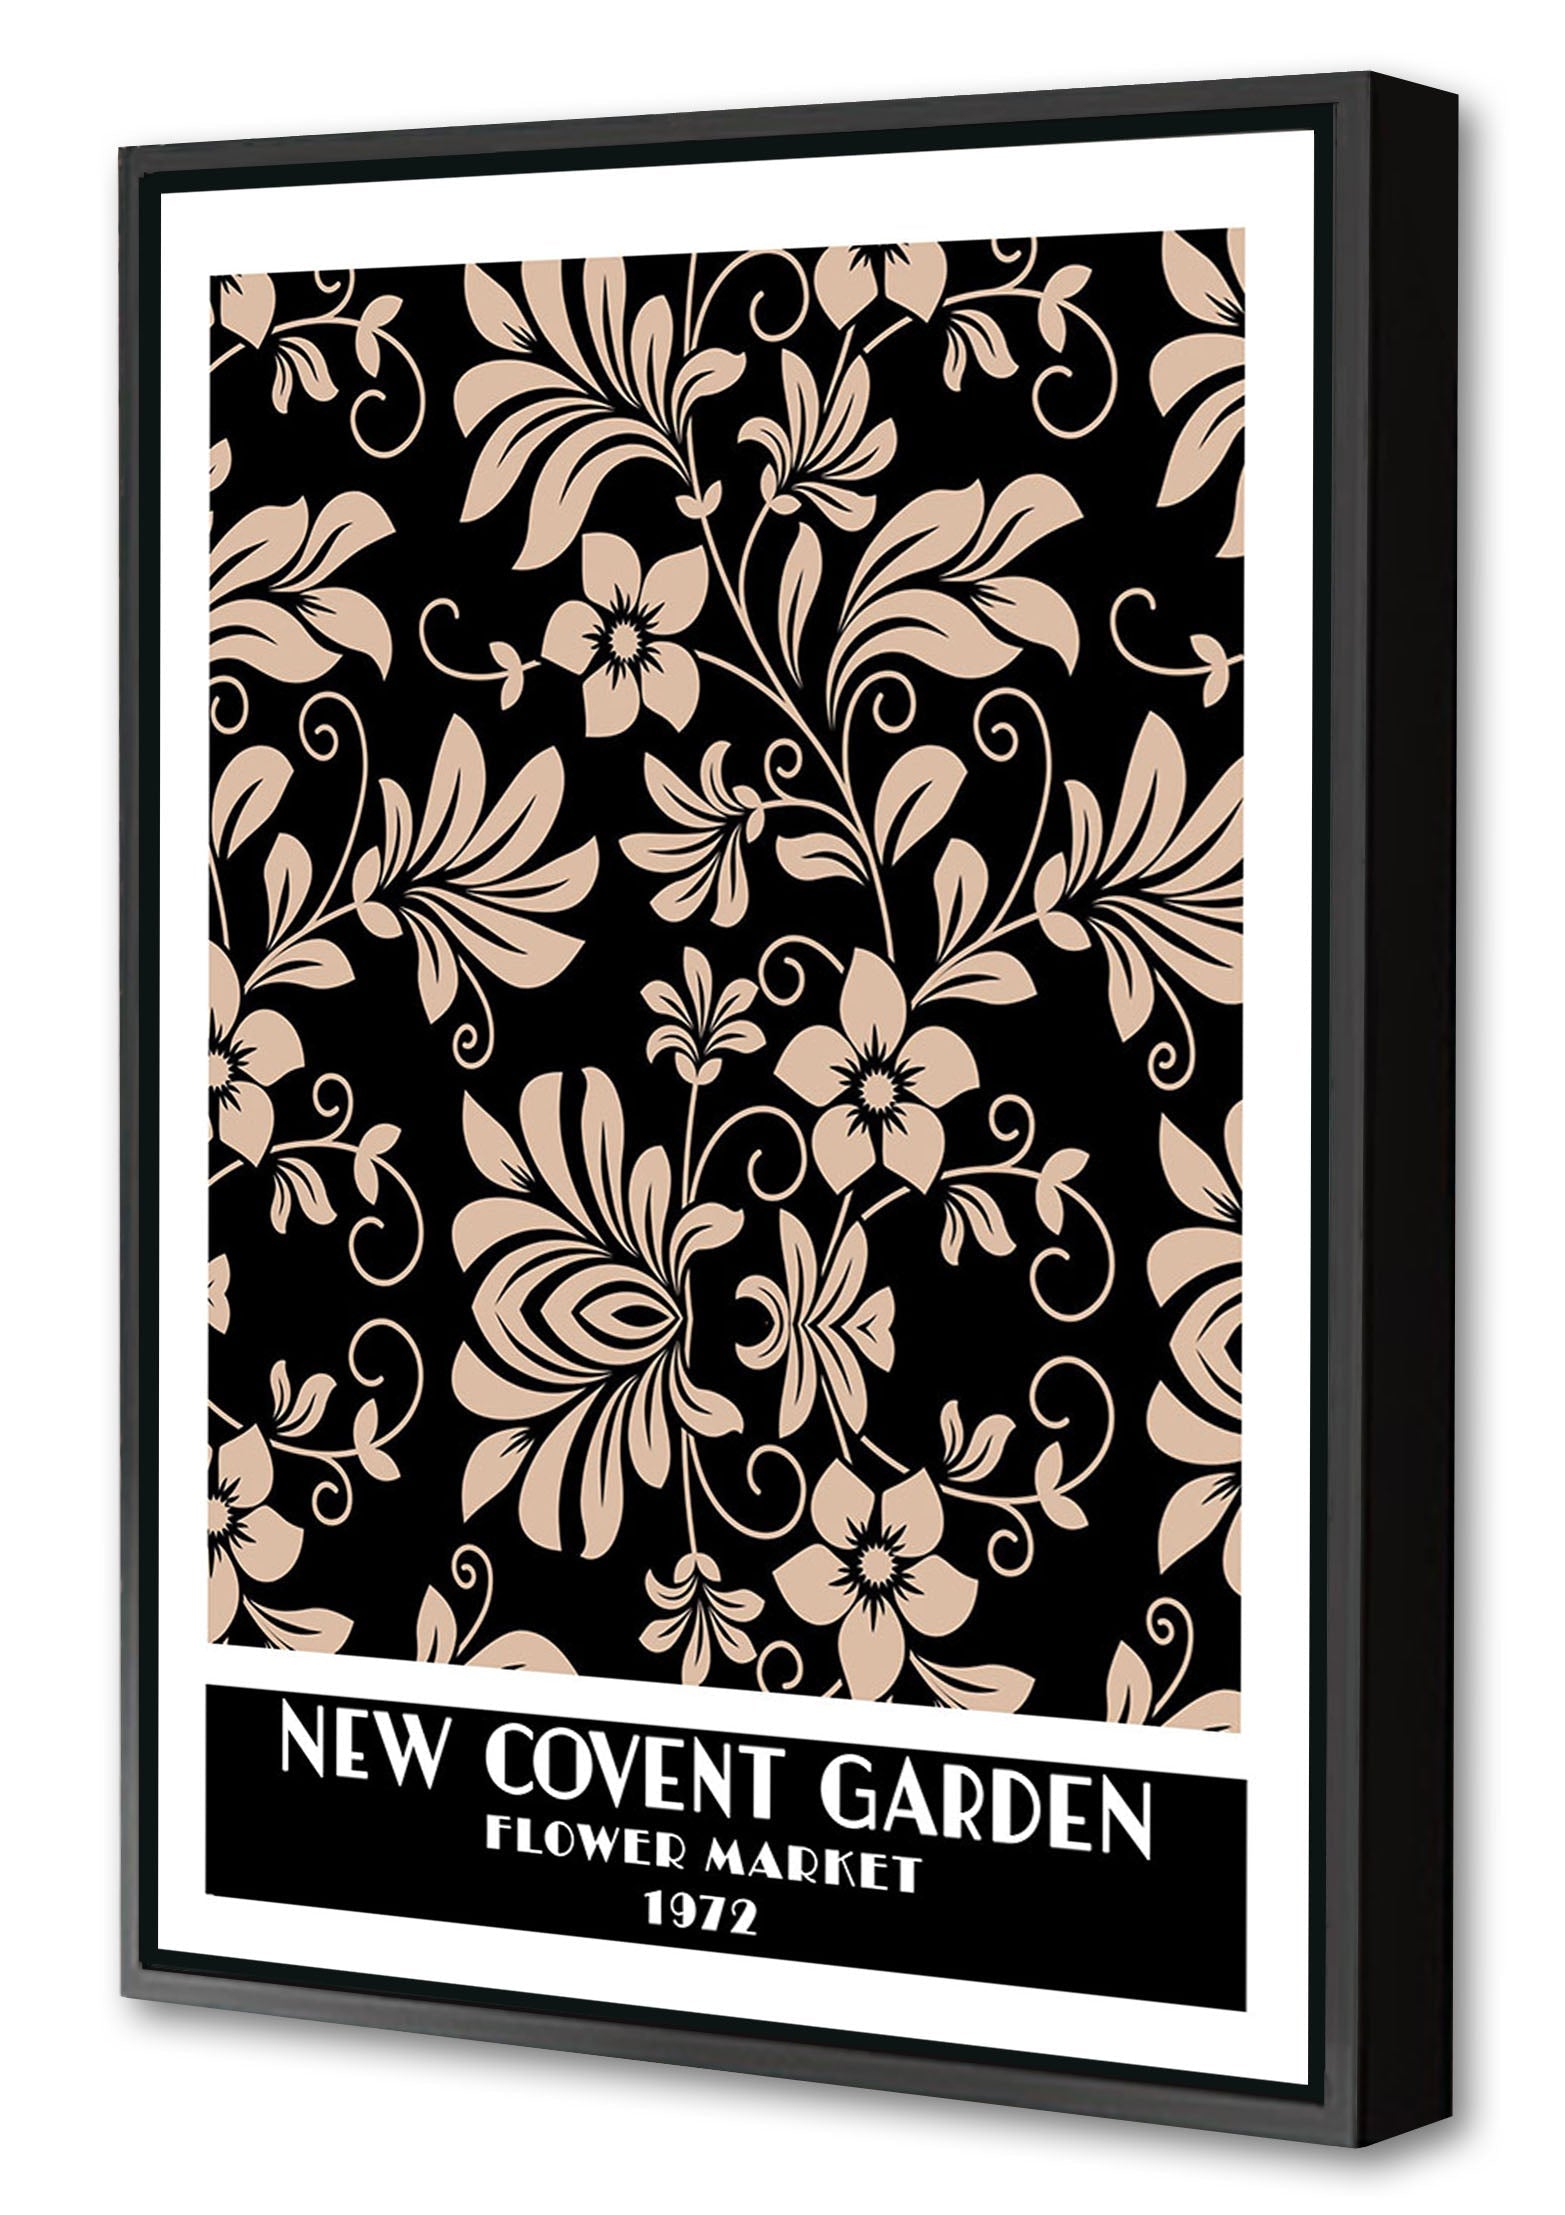 New Covent Garden Black-expositions, print-Canvas Print with Box Frame-40 x 60 cm-BLUE SHAKER